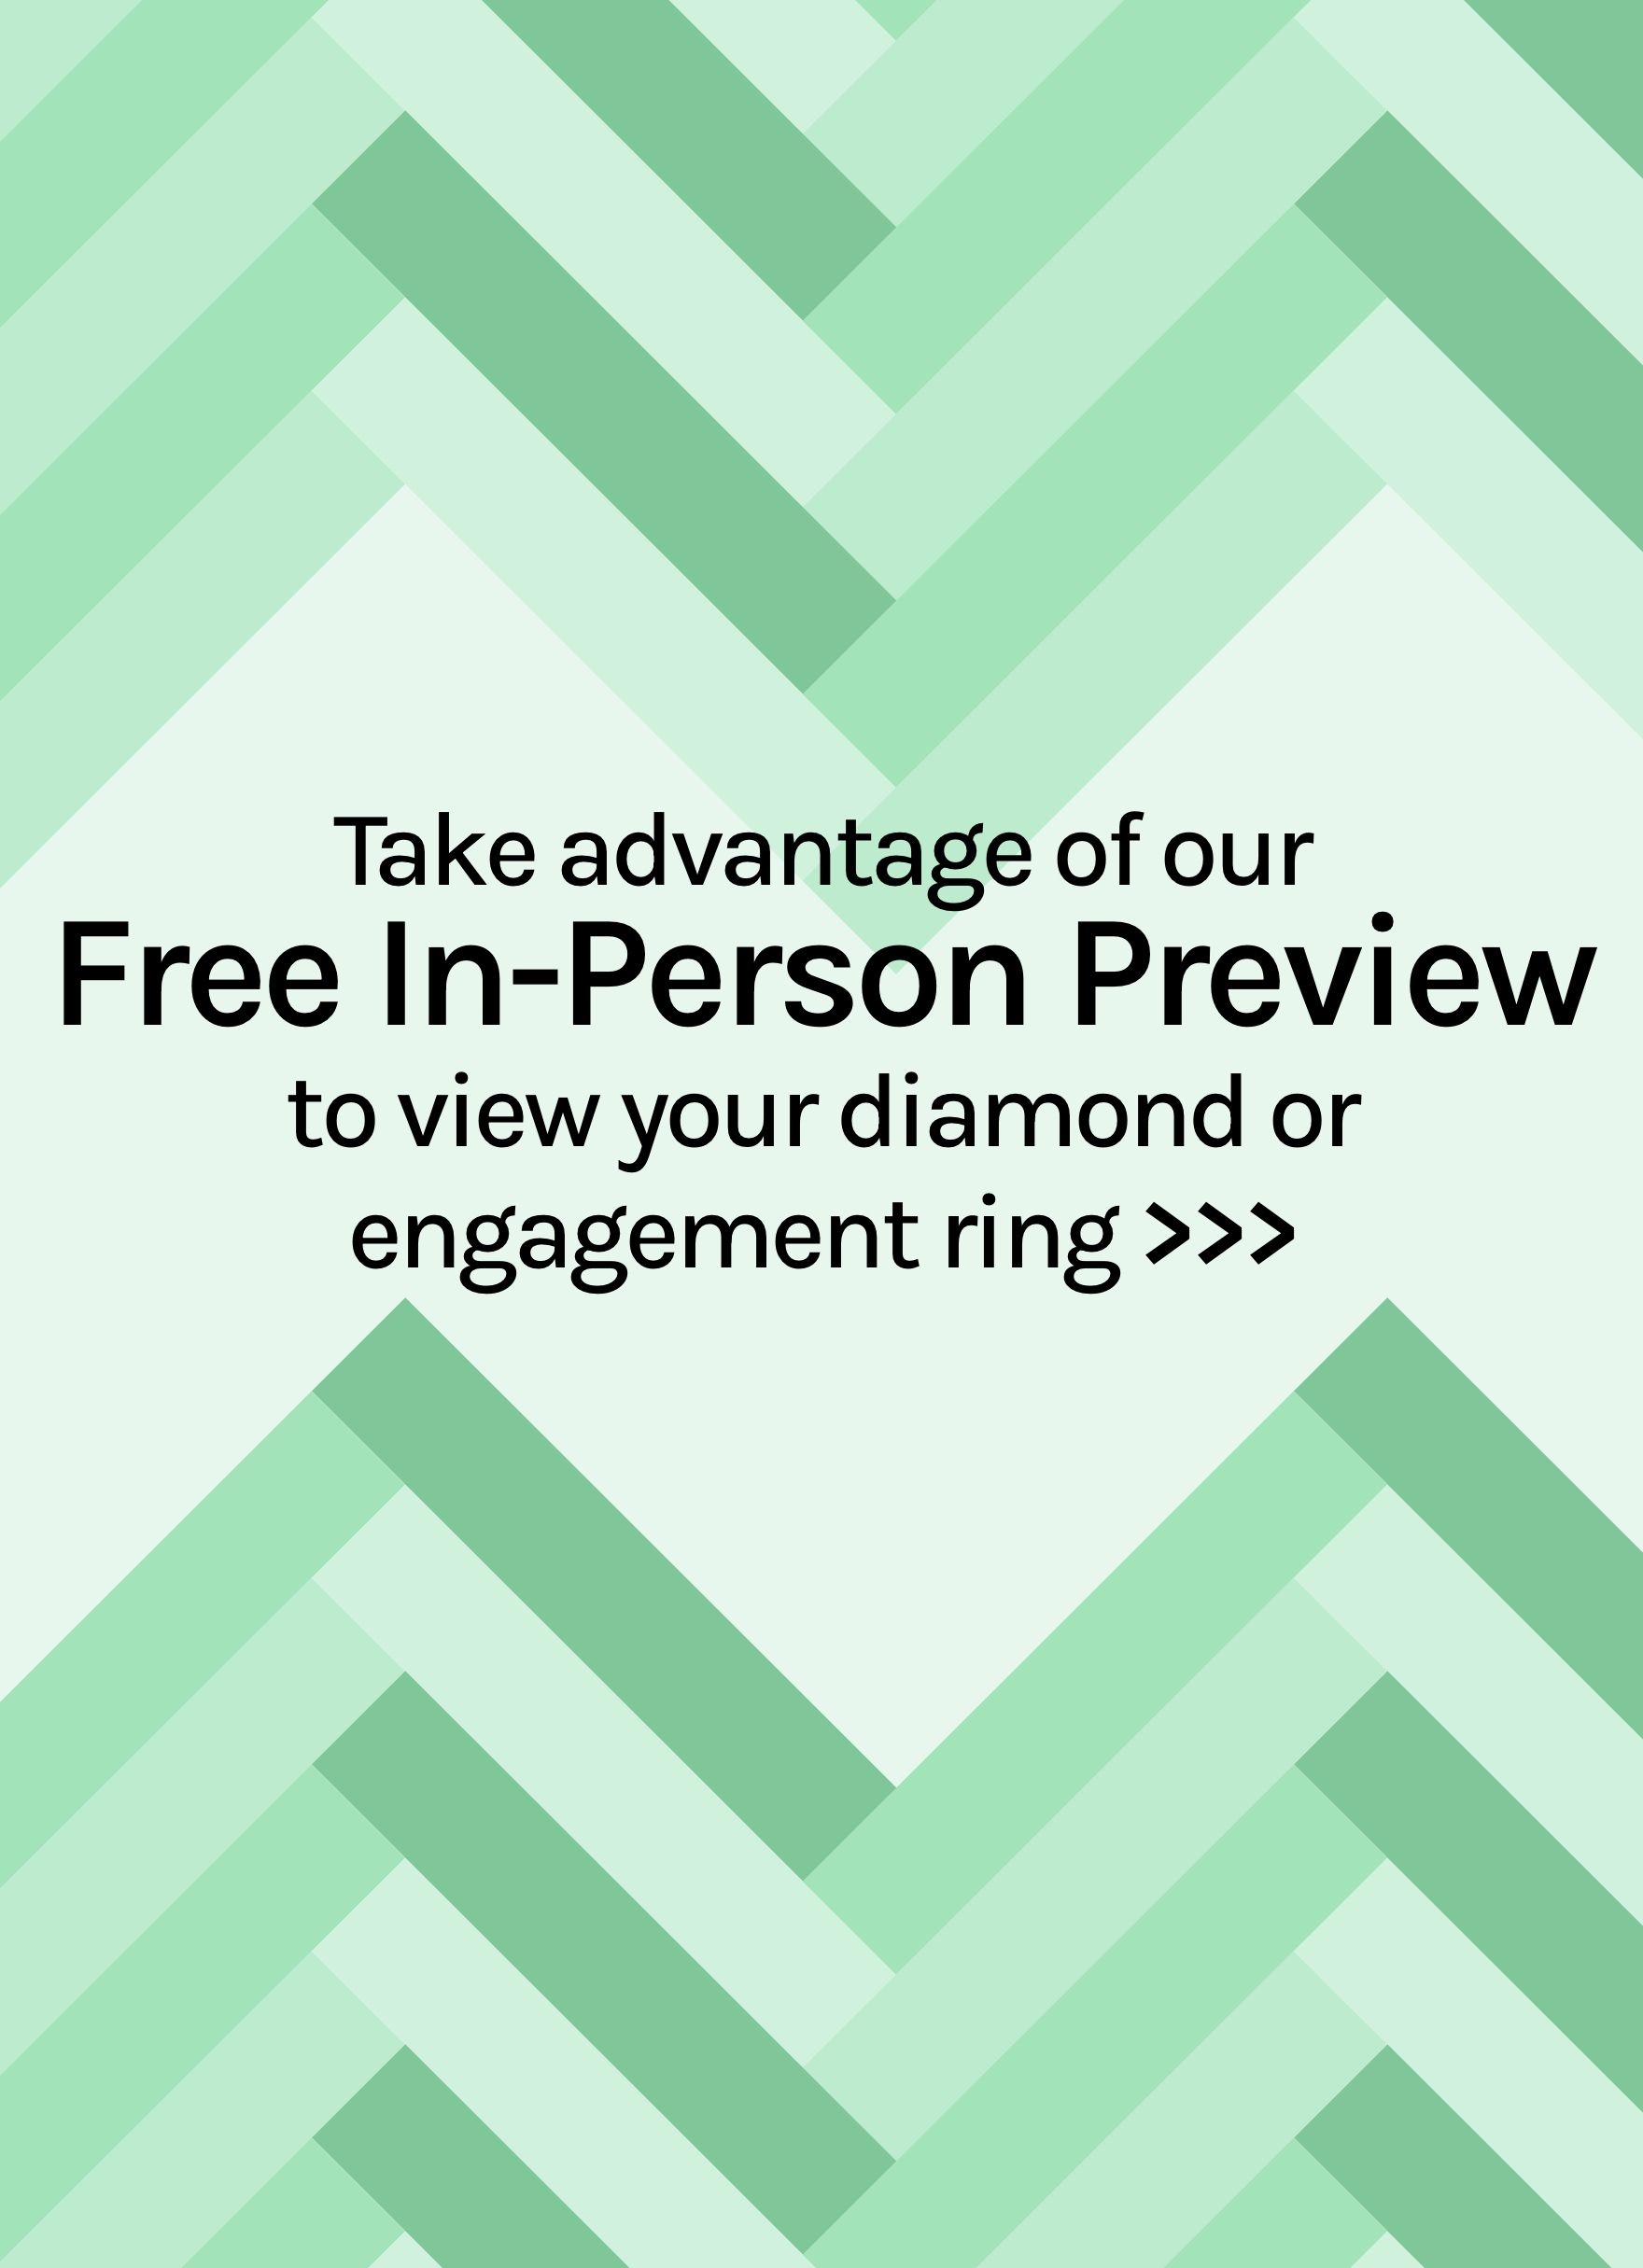 Take advantage of our Free In-Store Preview to view your diamond or engagement ring